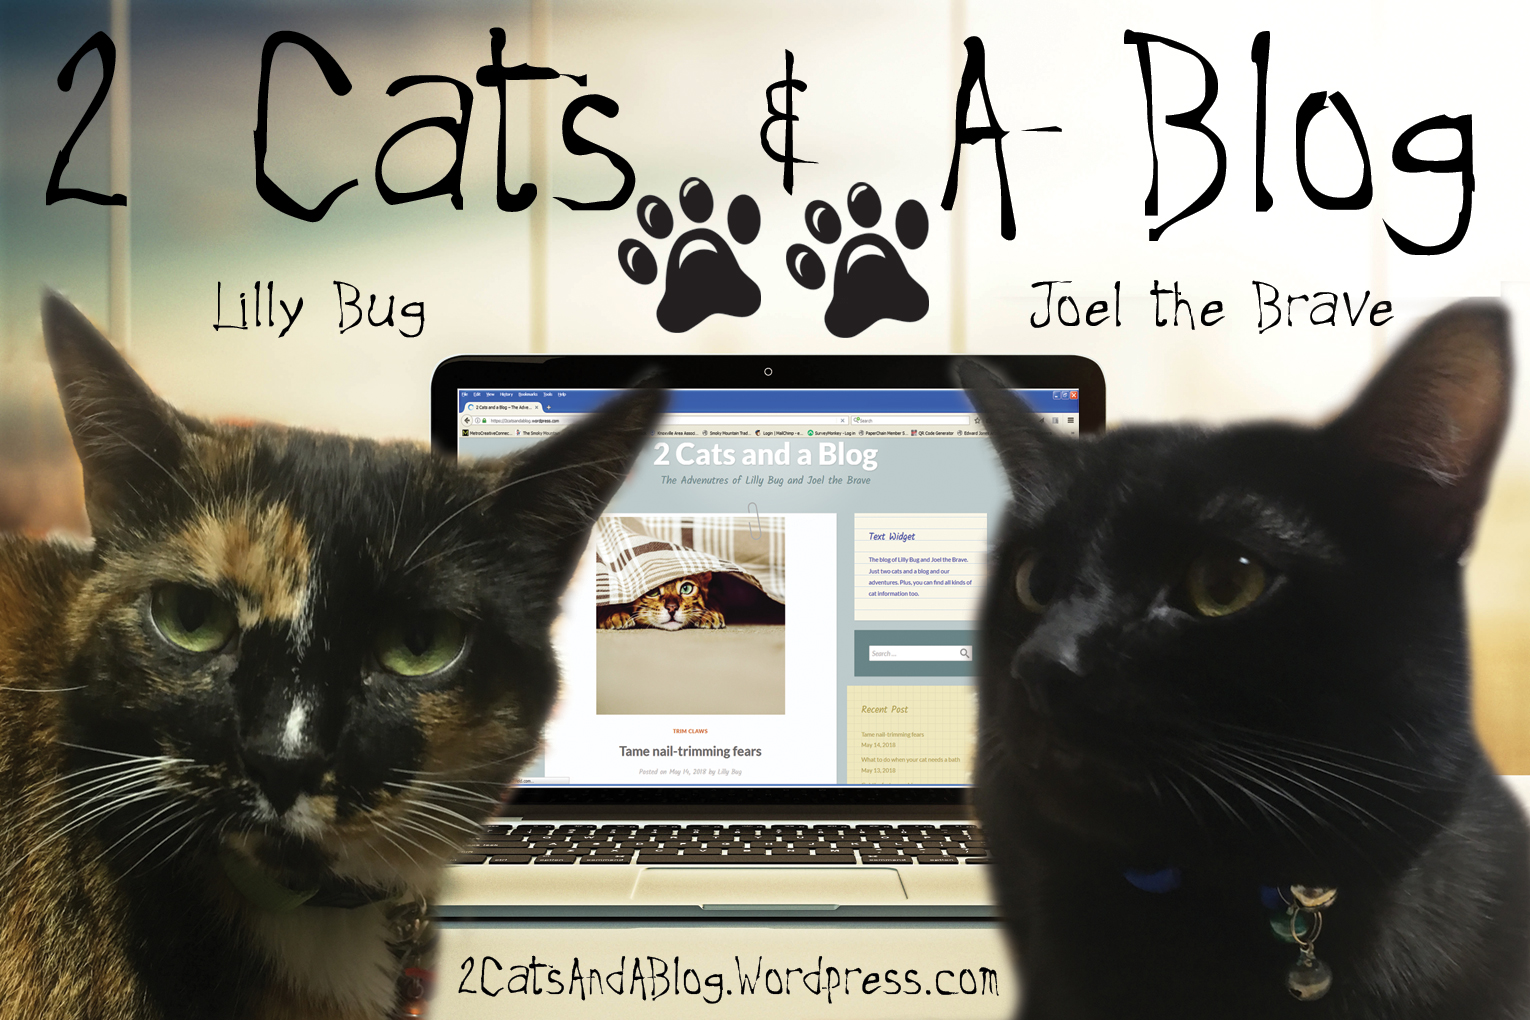 2 Cats and a Blog (Lilly Bug and Joel the Brave) https://2catsandablog.wordpress.com